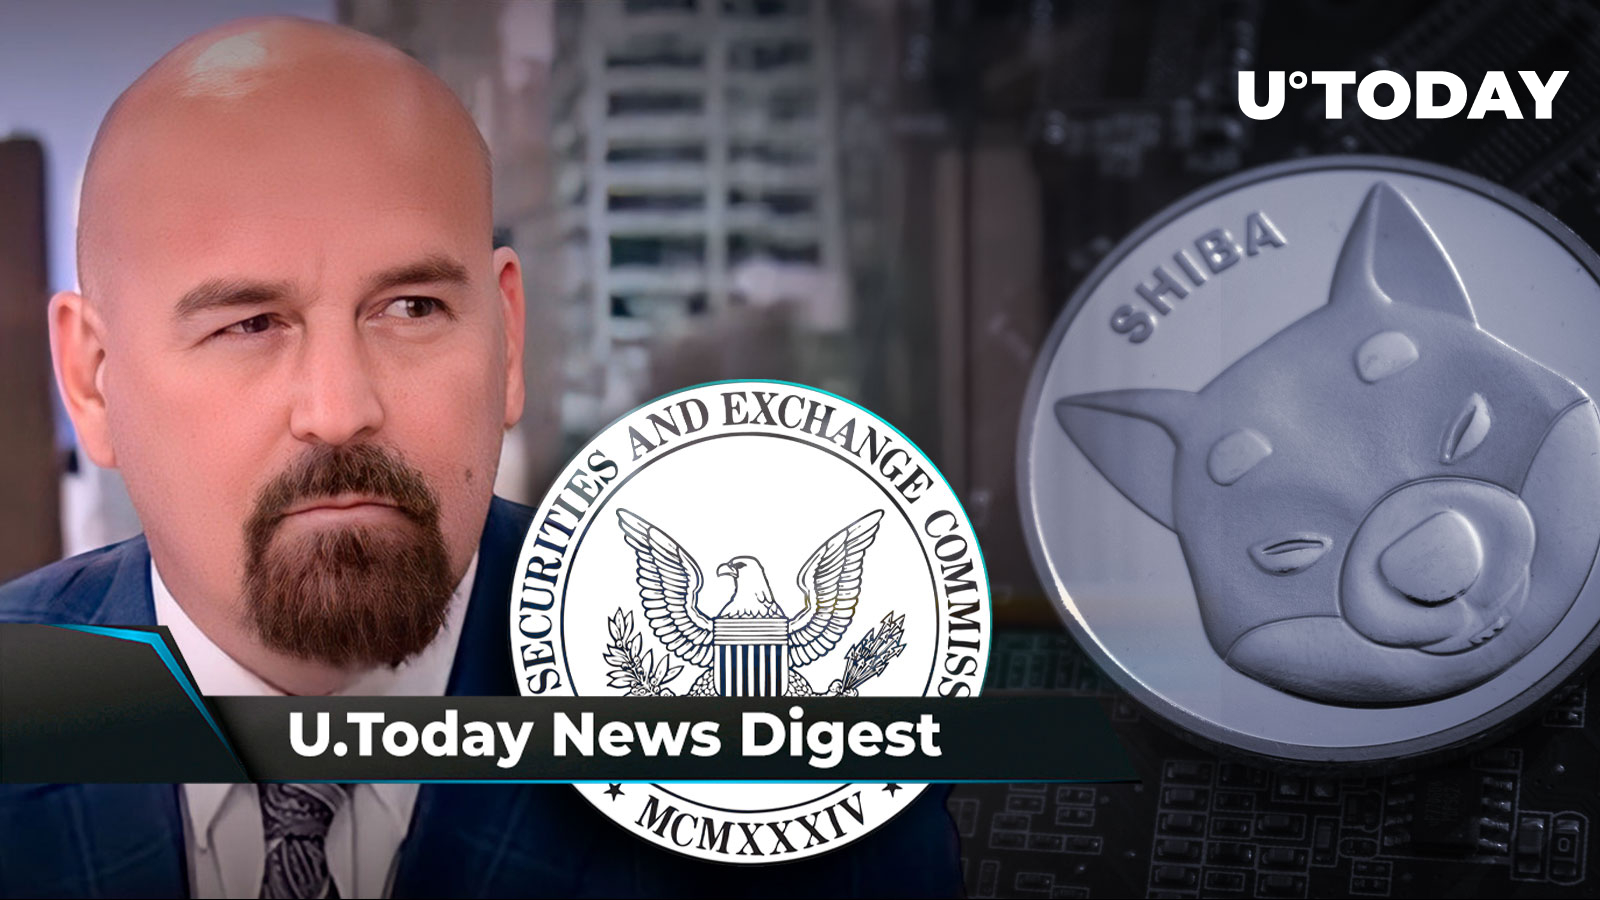 John Deaton Opines on SEC’s Strongest Argument, SHIB to Host “Mint Party” with Bugatti Group, Binance Launches ADA and XRP Products: Crypto News Digest by U.Today